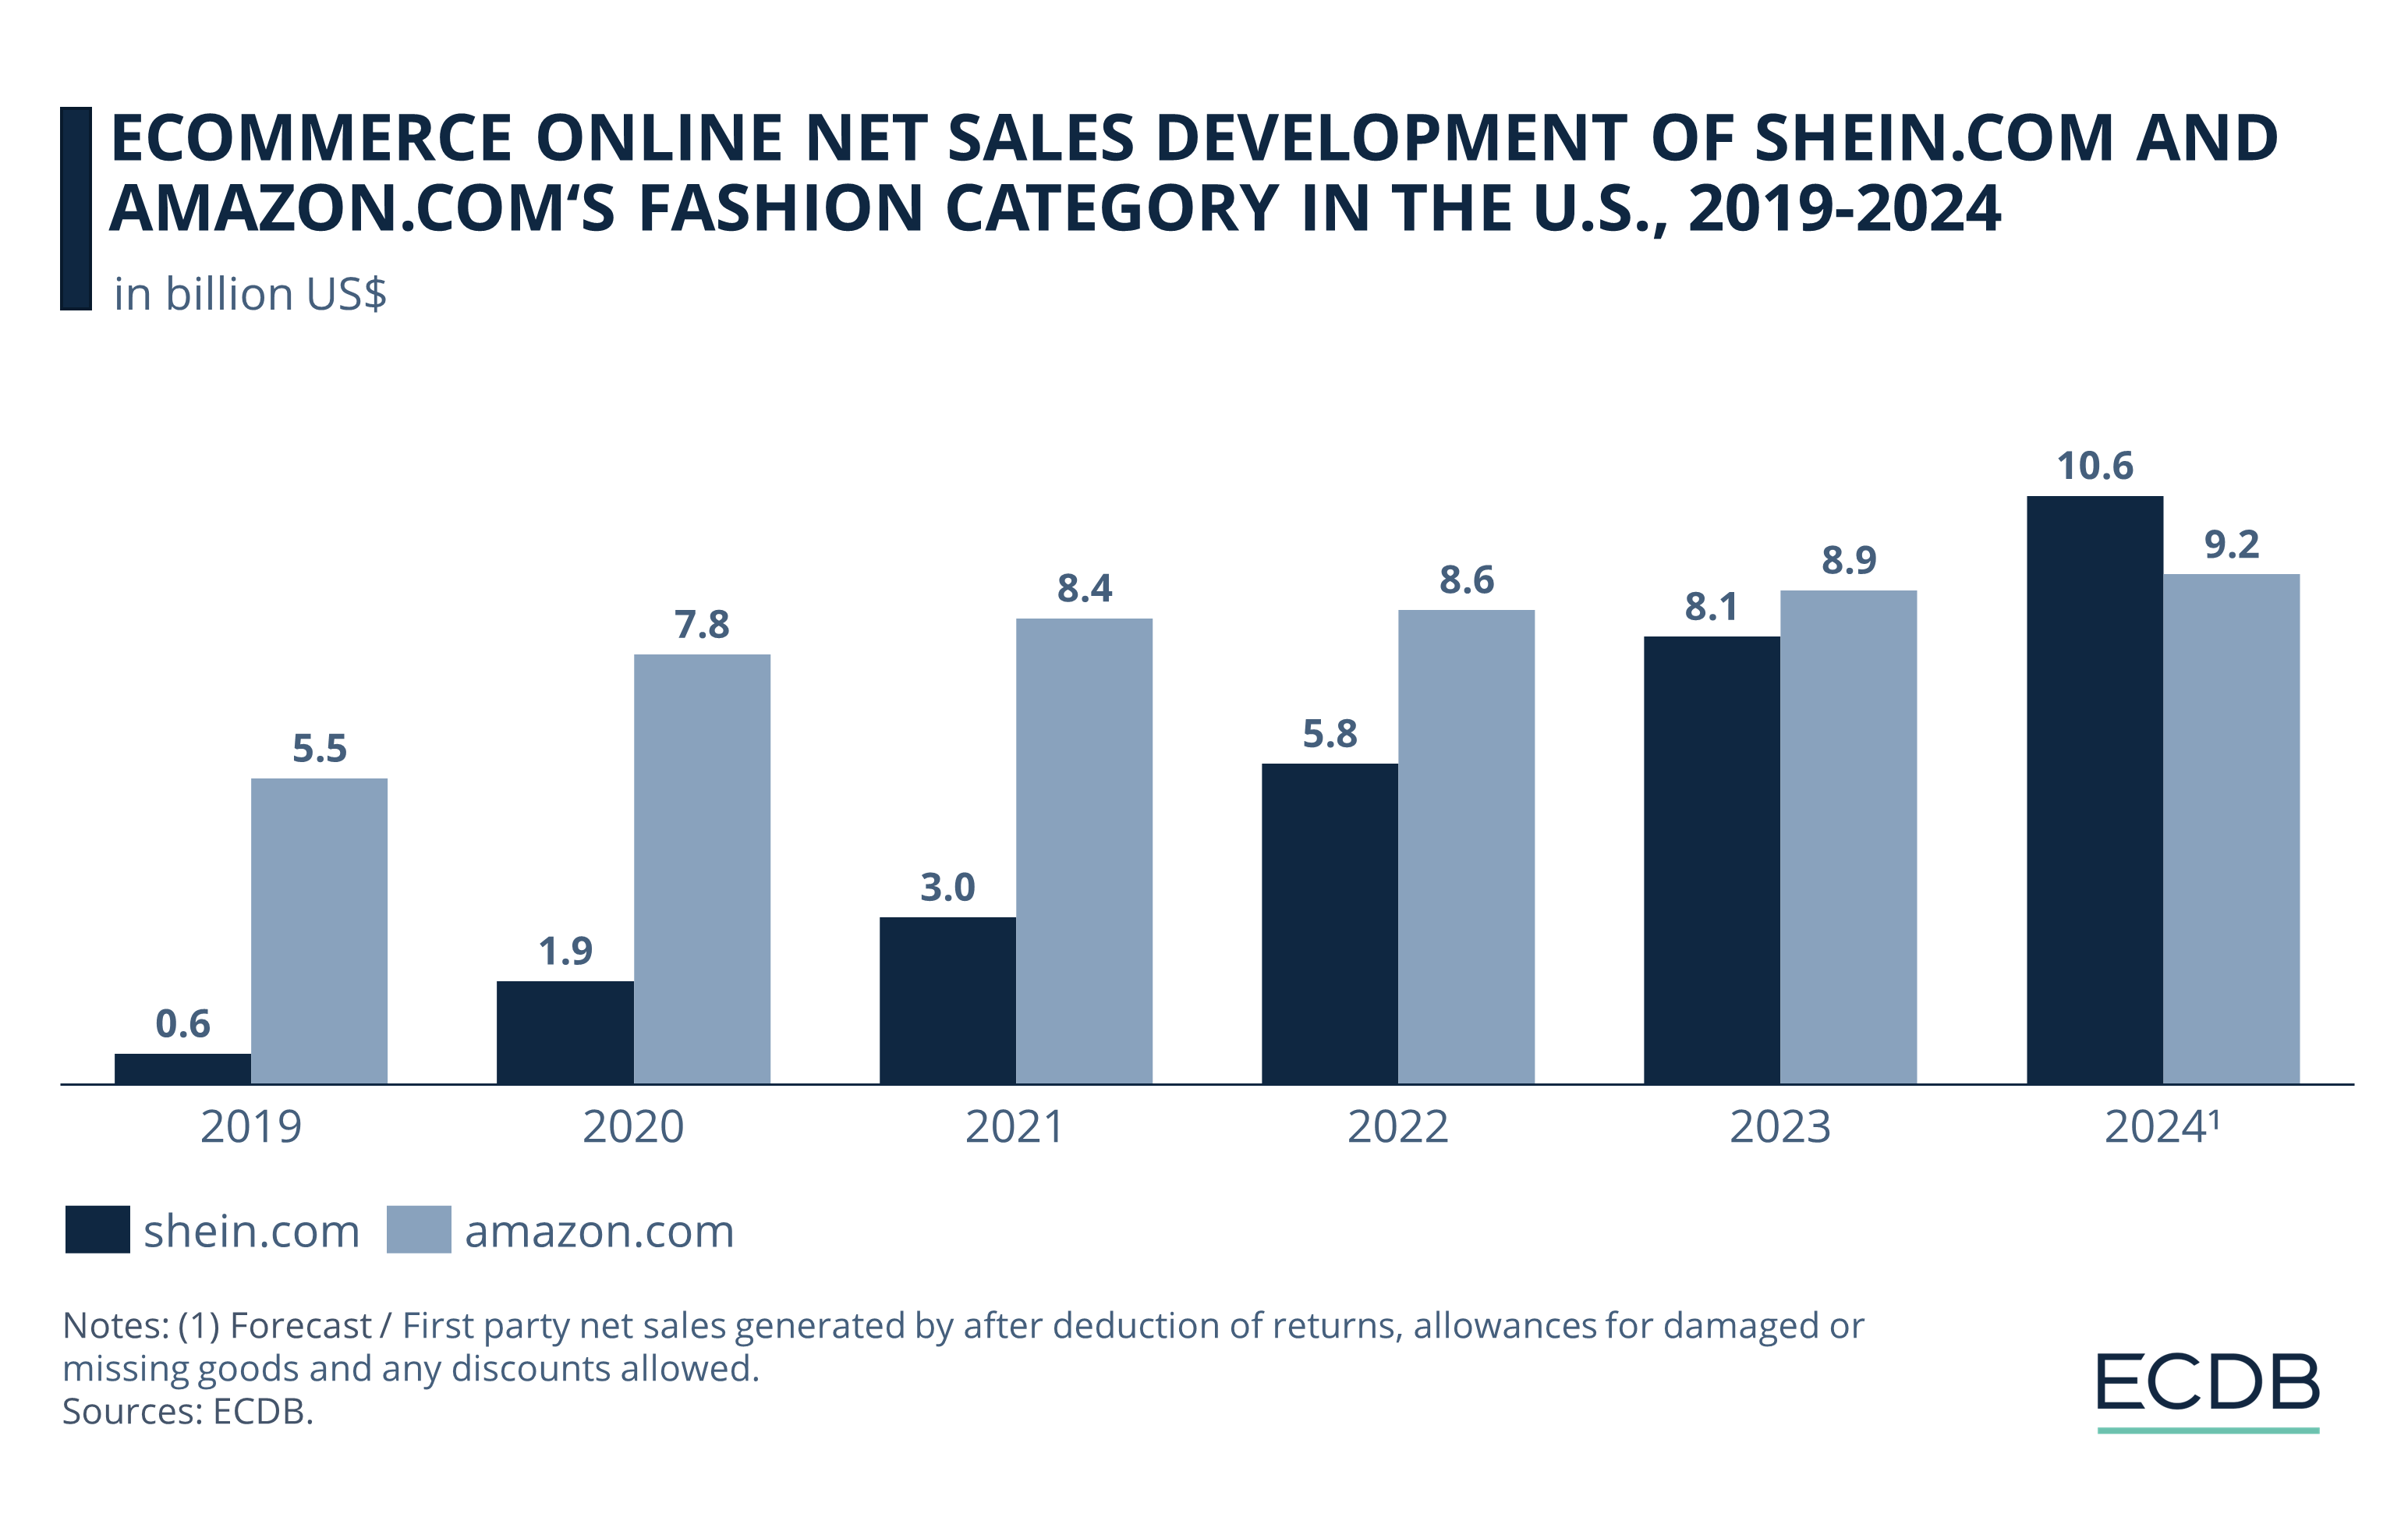 eCommerce Net Sales Development of Shein.com and Amazon.com's Fashion Category in the U.S., 2019-2024